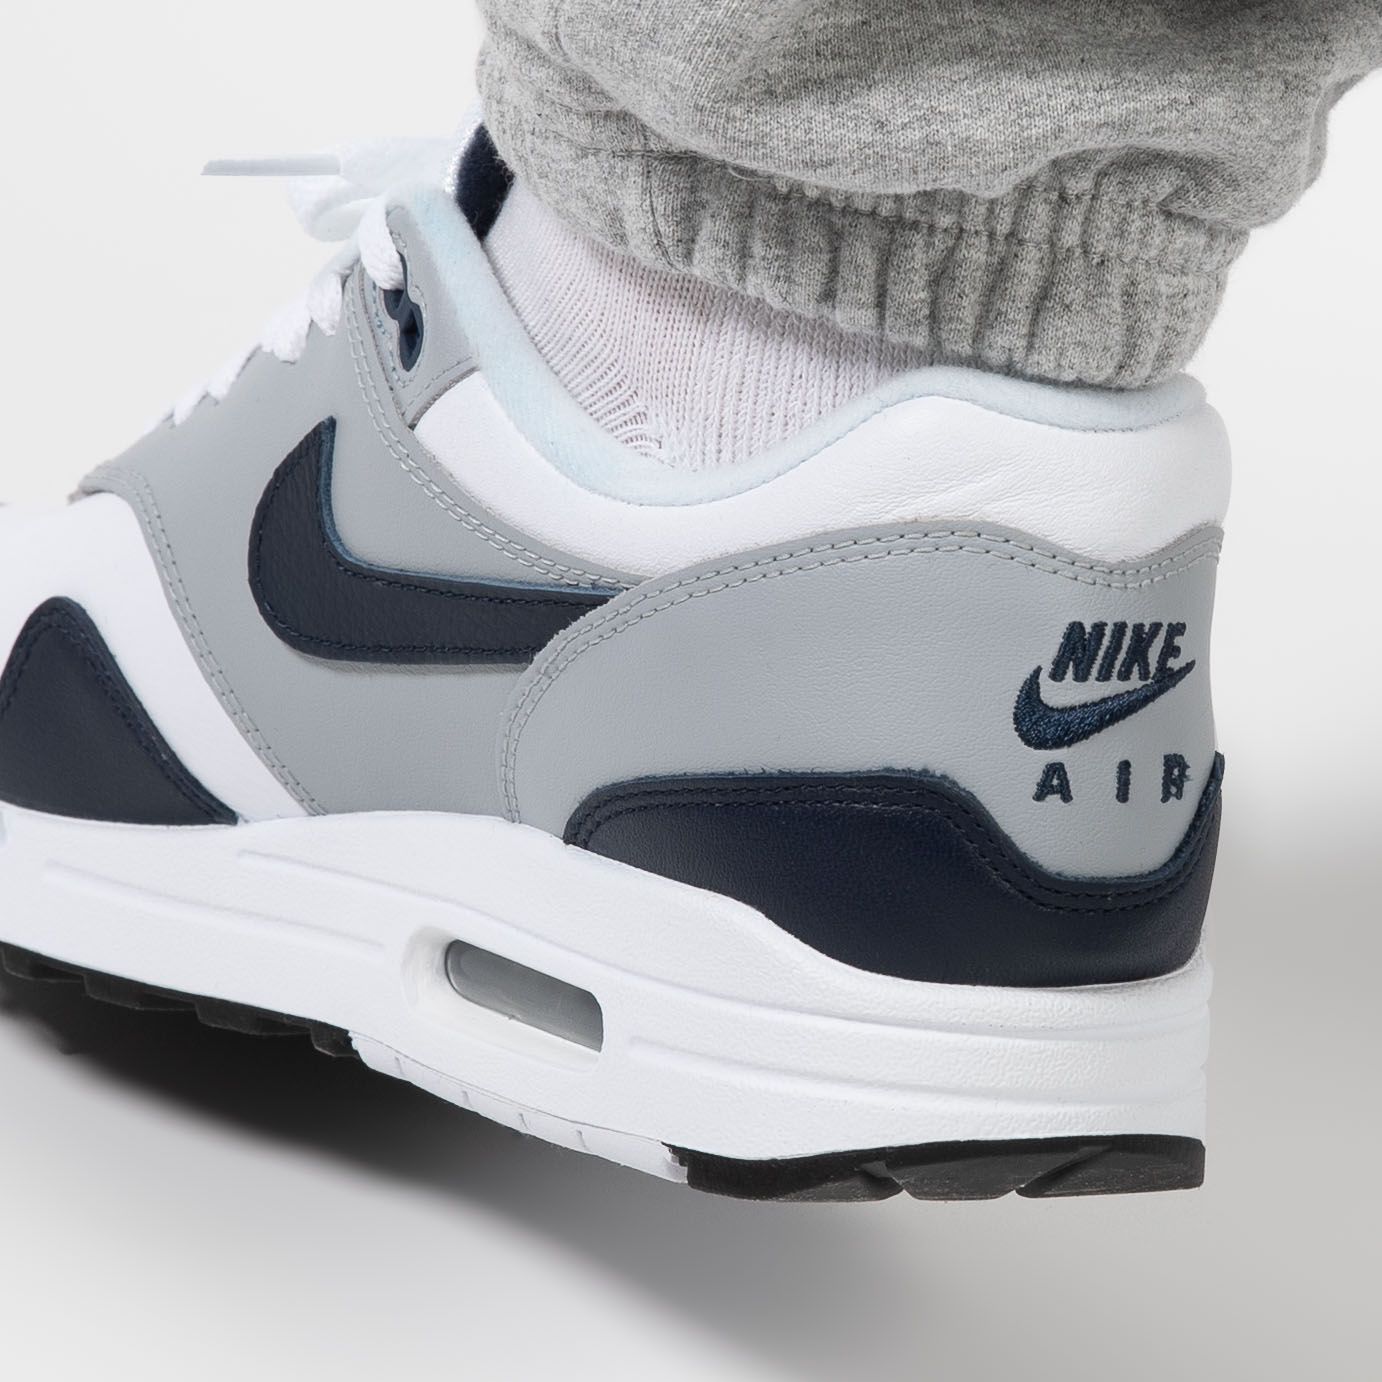 Titolo on X: out now 🔥 Nike Air Max 1 Lv8 Obsidian are